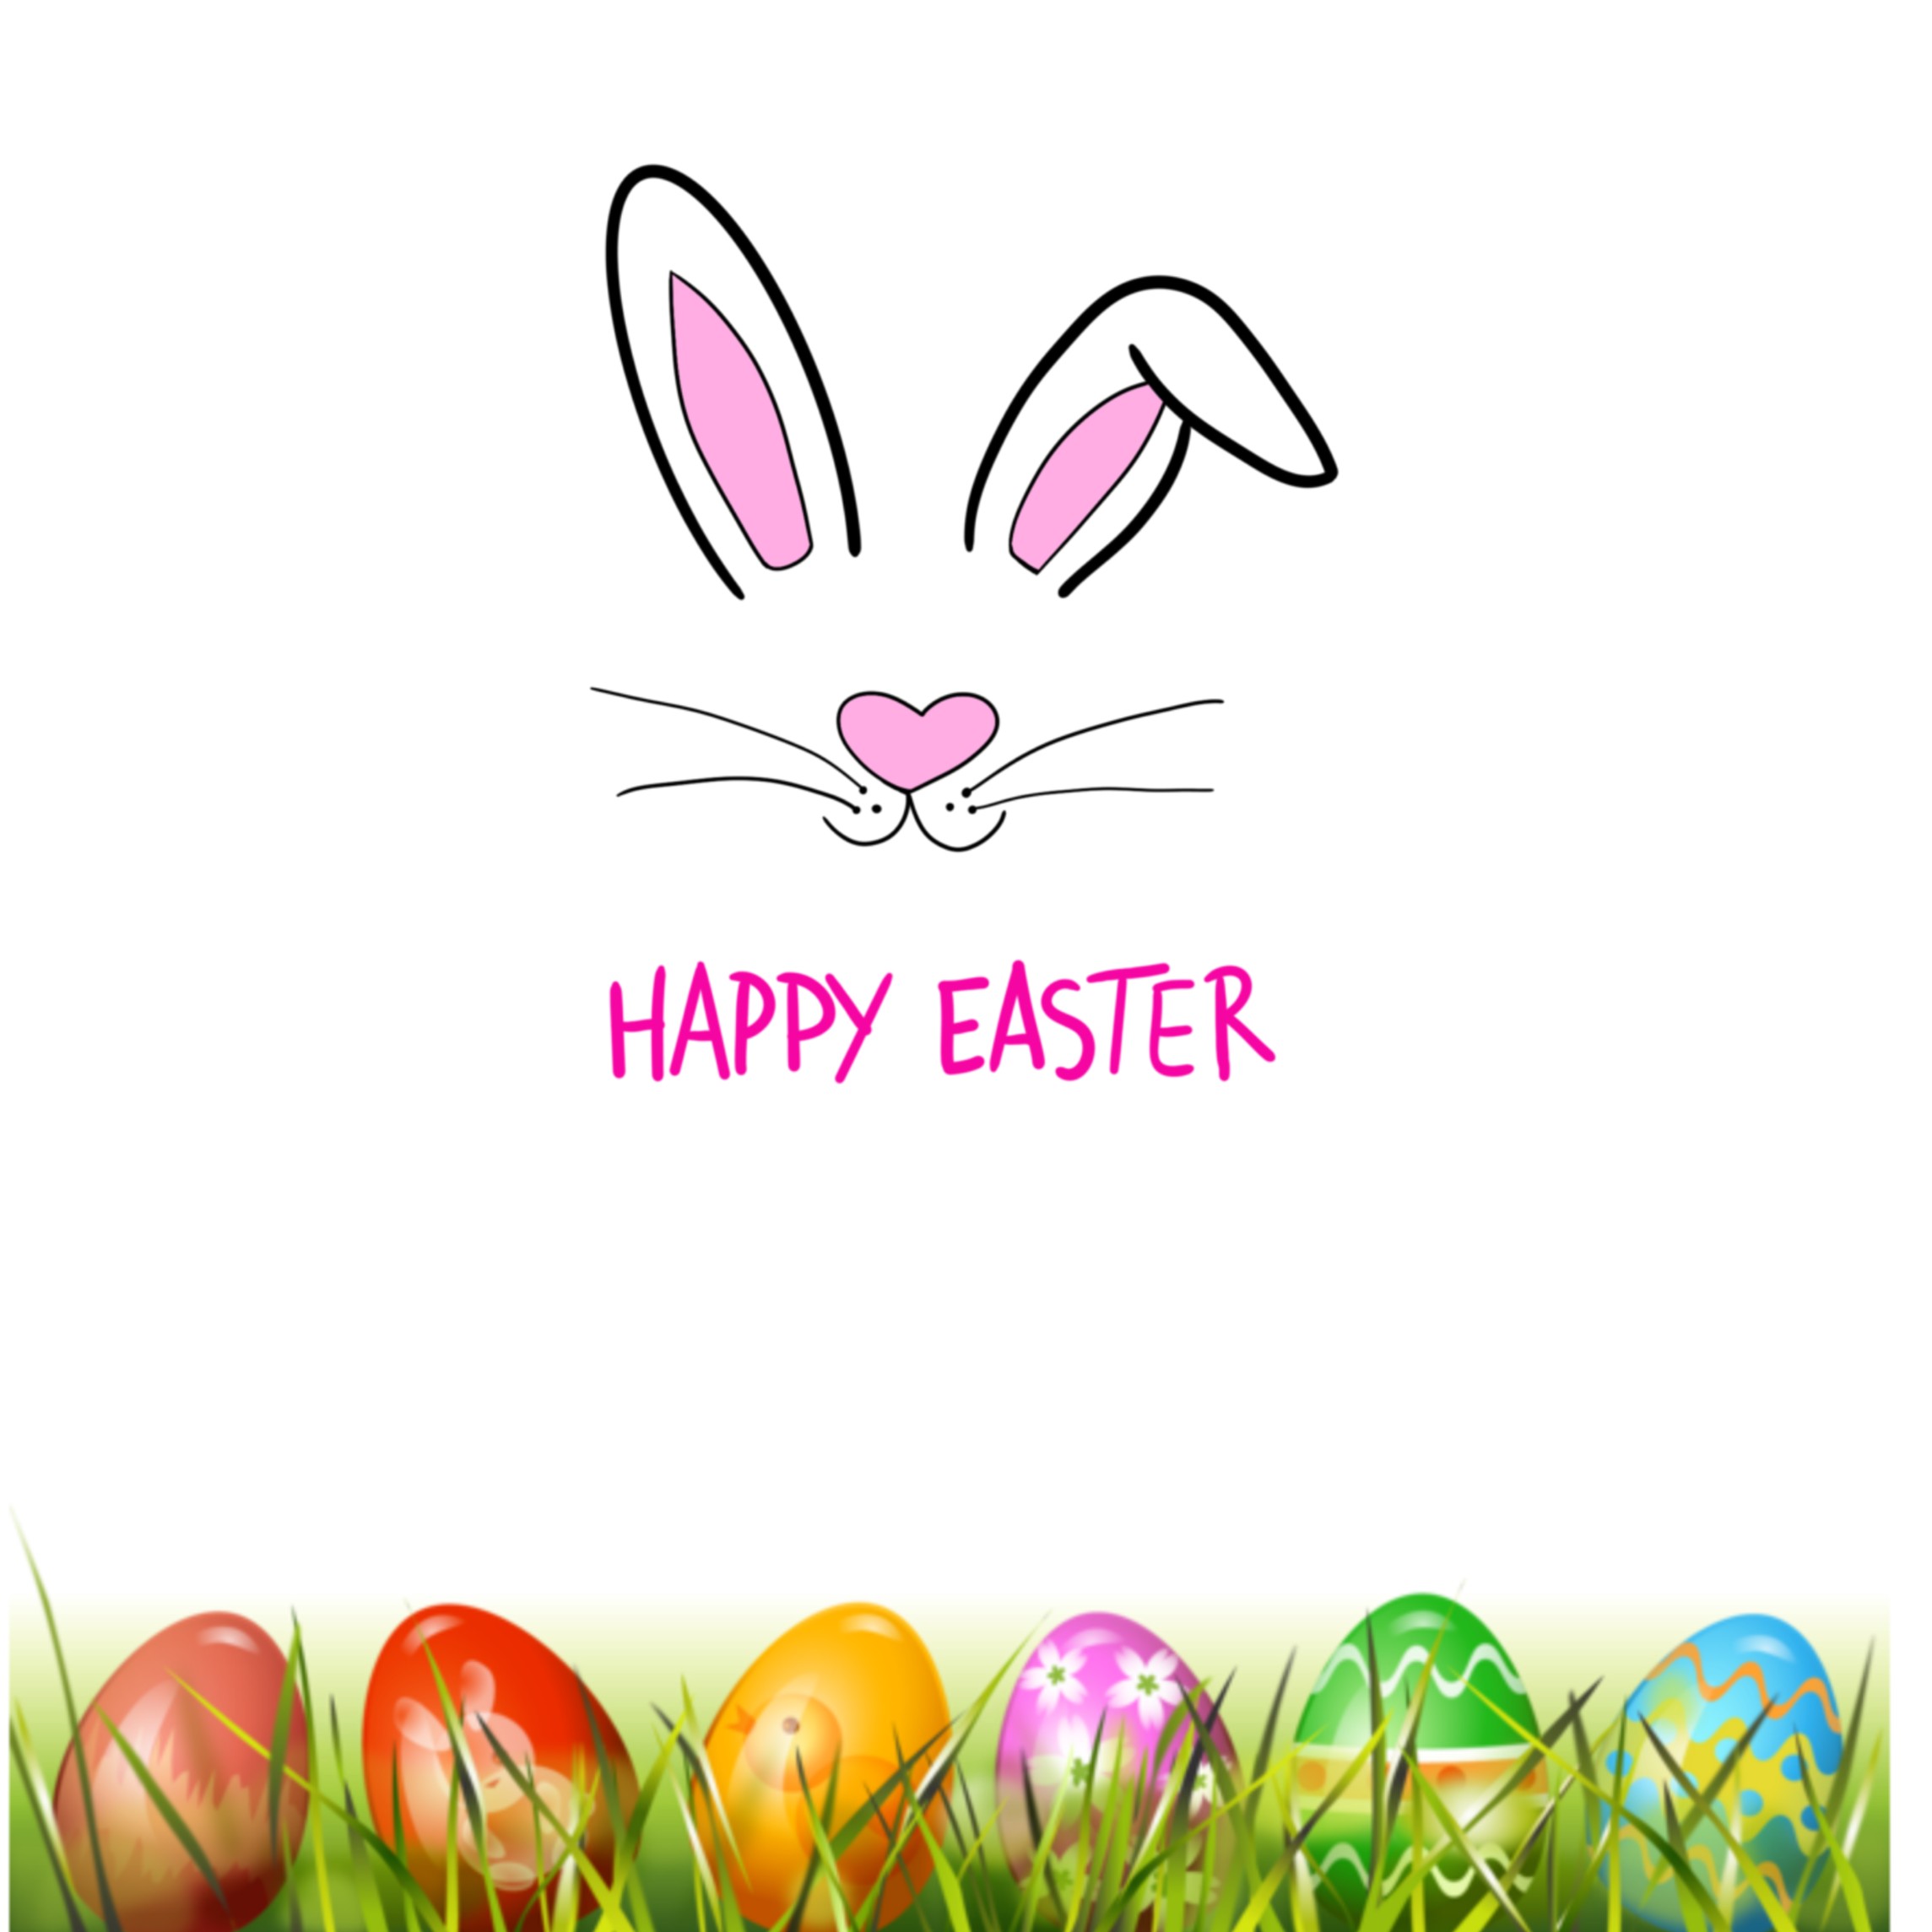  #happy#easter